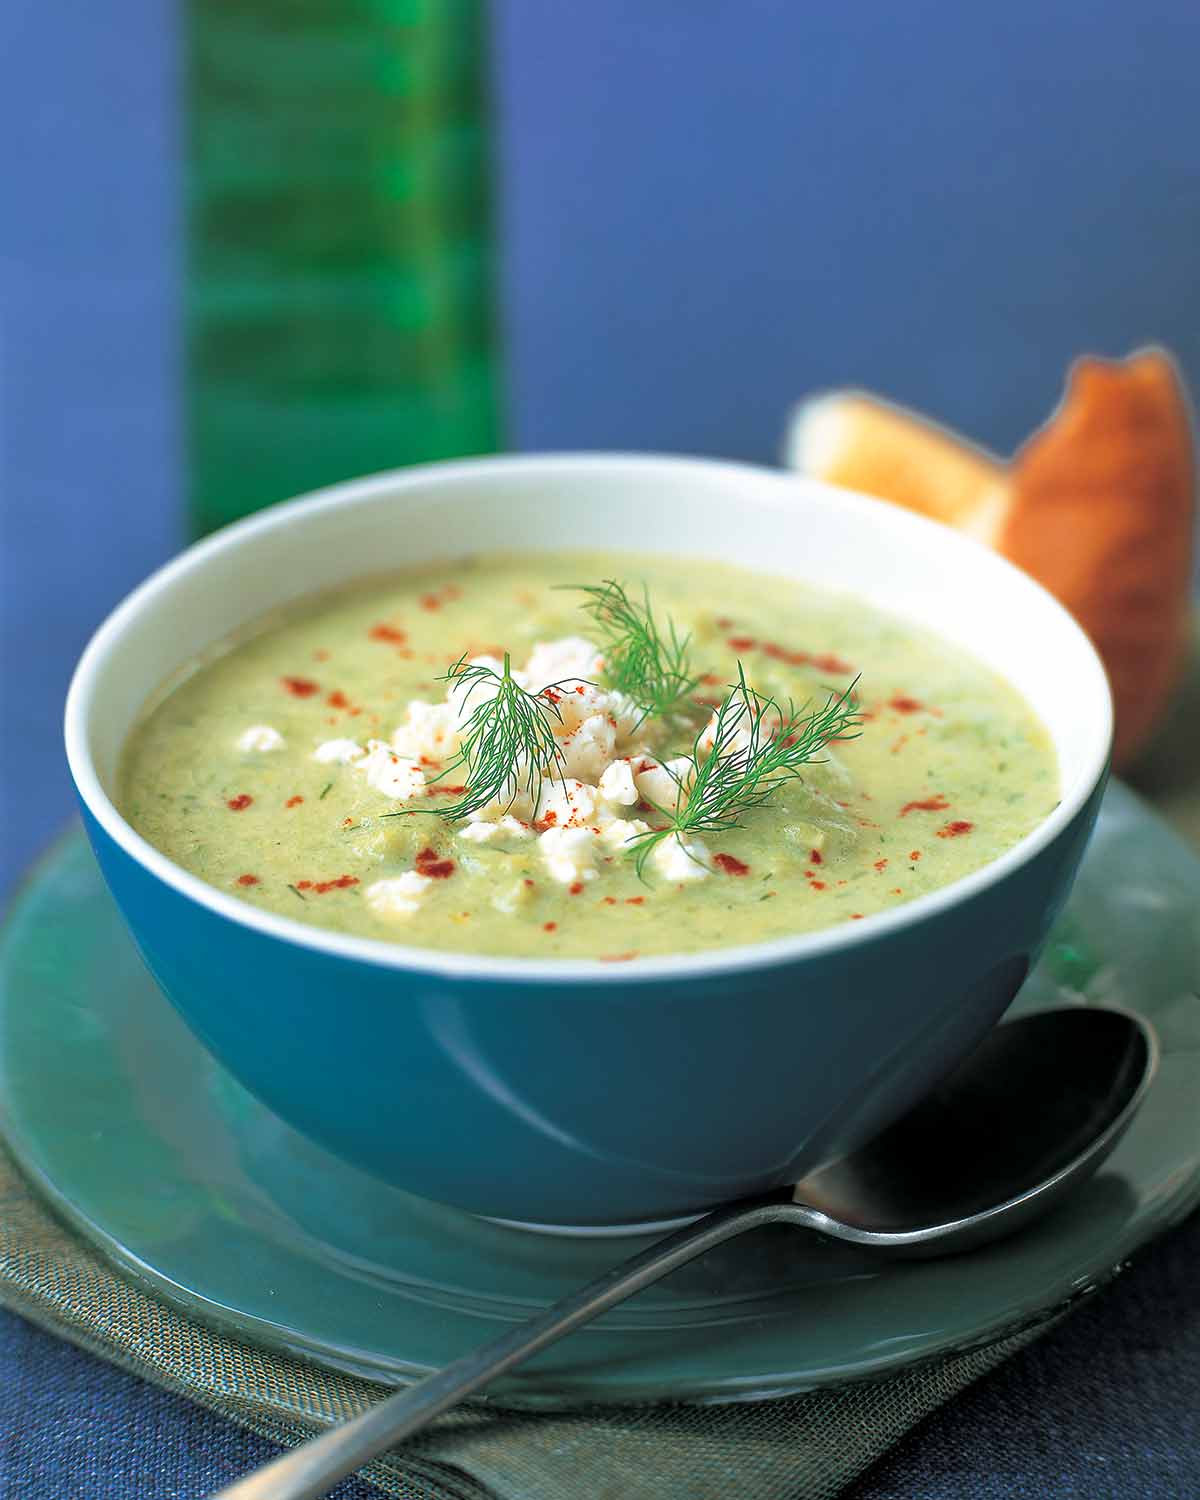 A blue bowl filled with a pale green cream soup, topped with paprika, feta, and fresh dill fronds.